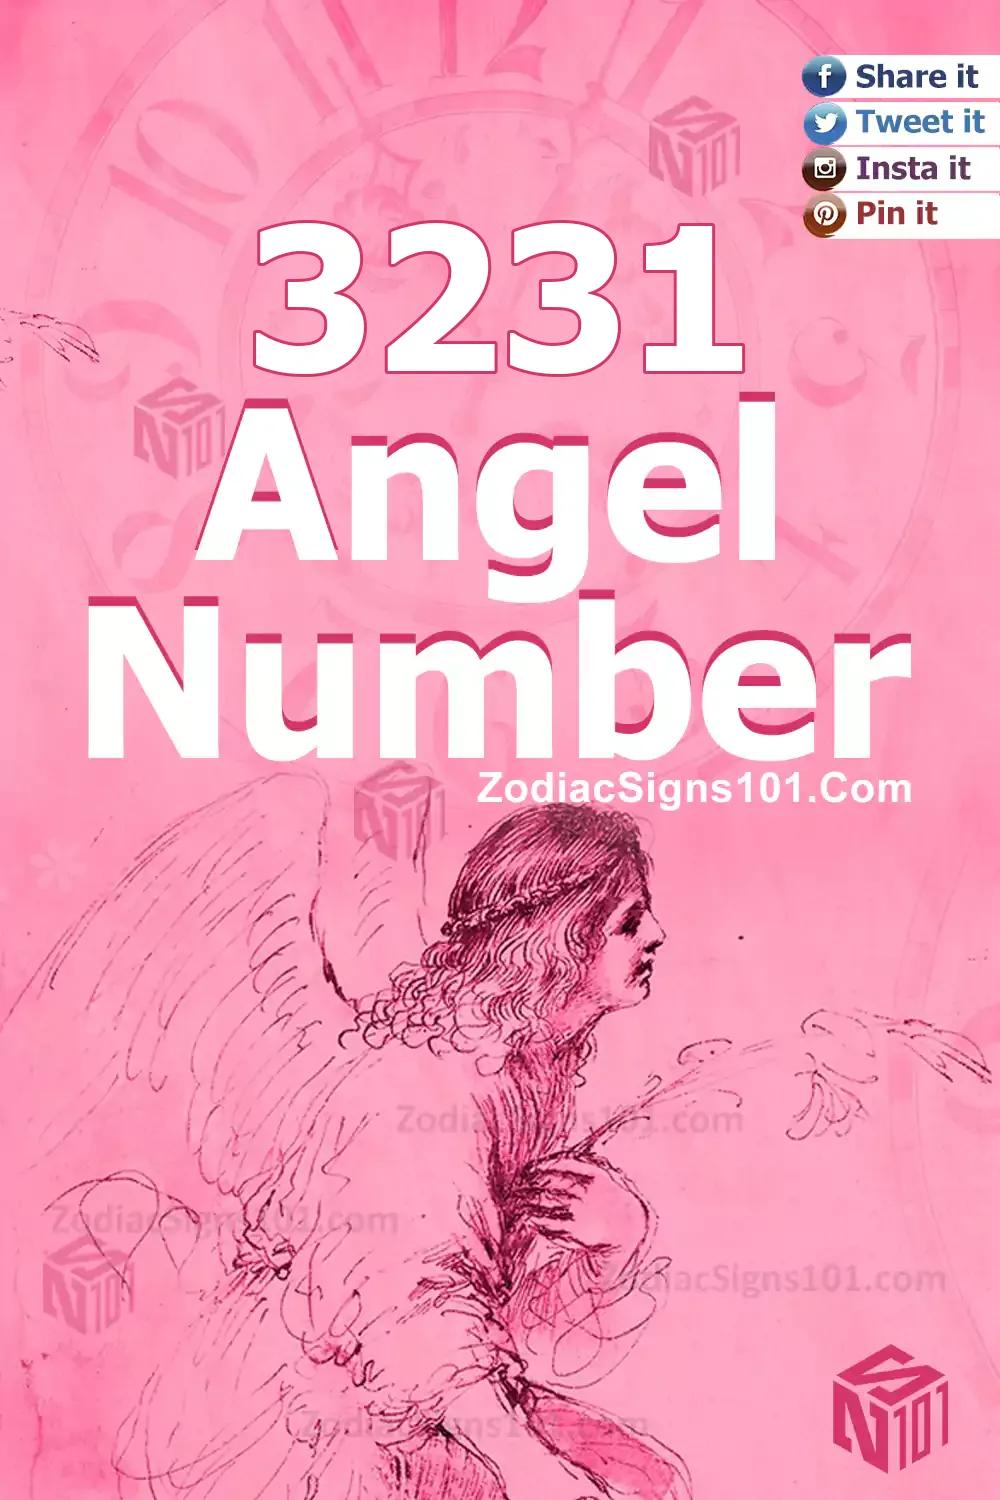 3231 Angel Number Meaning